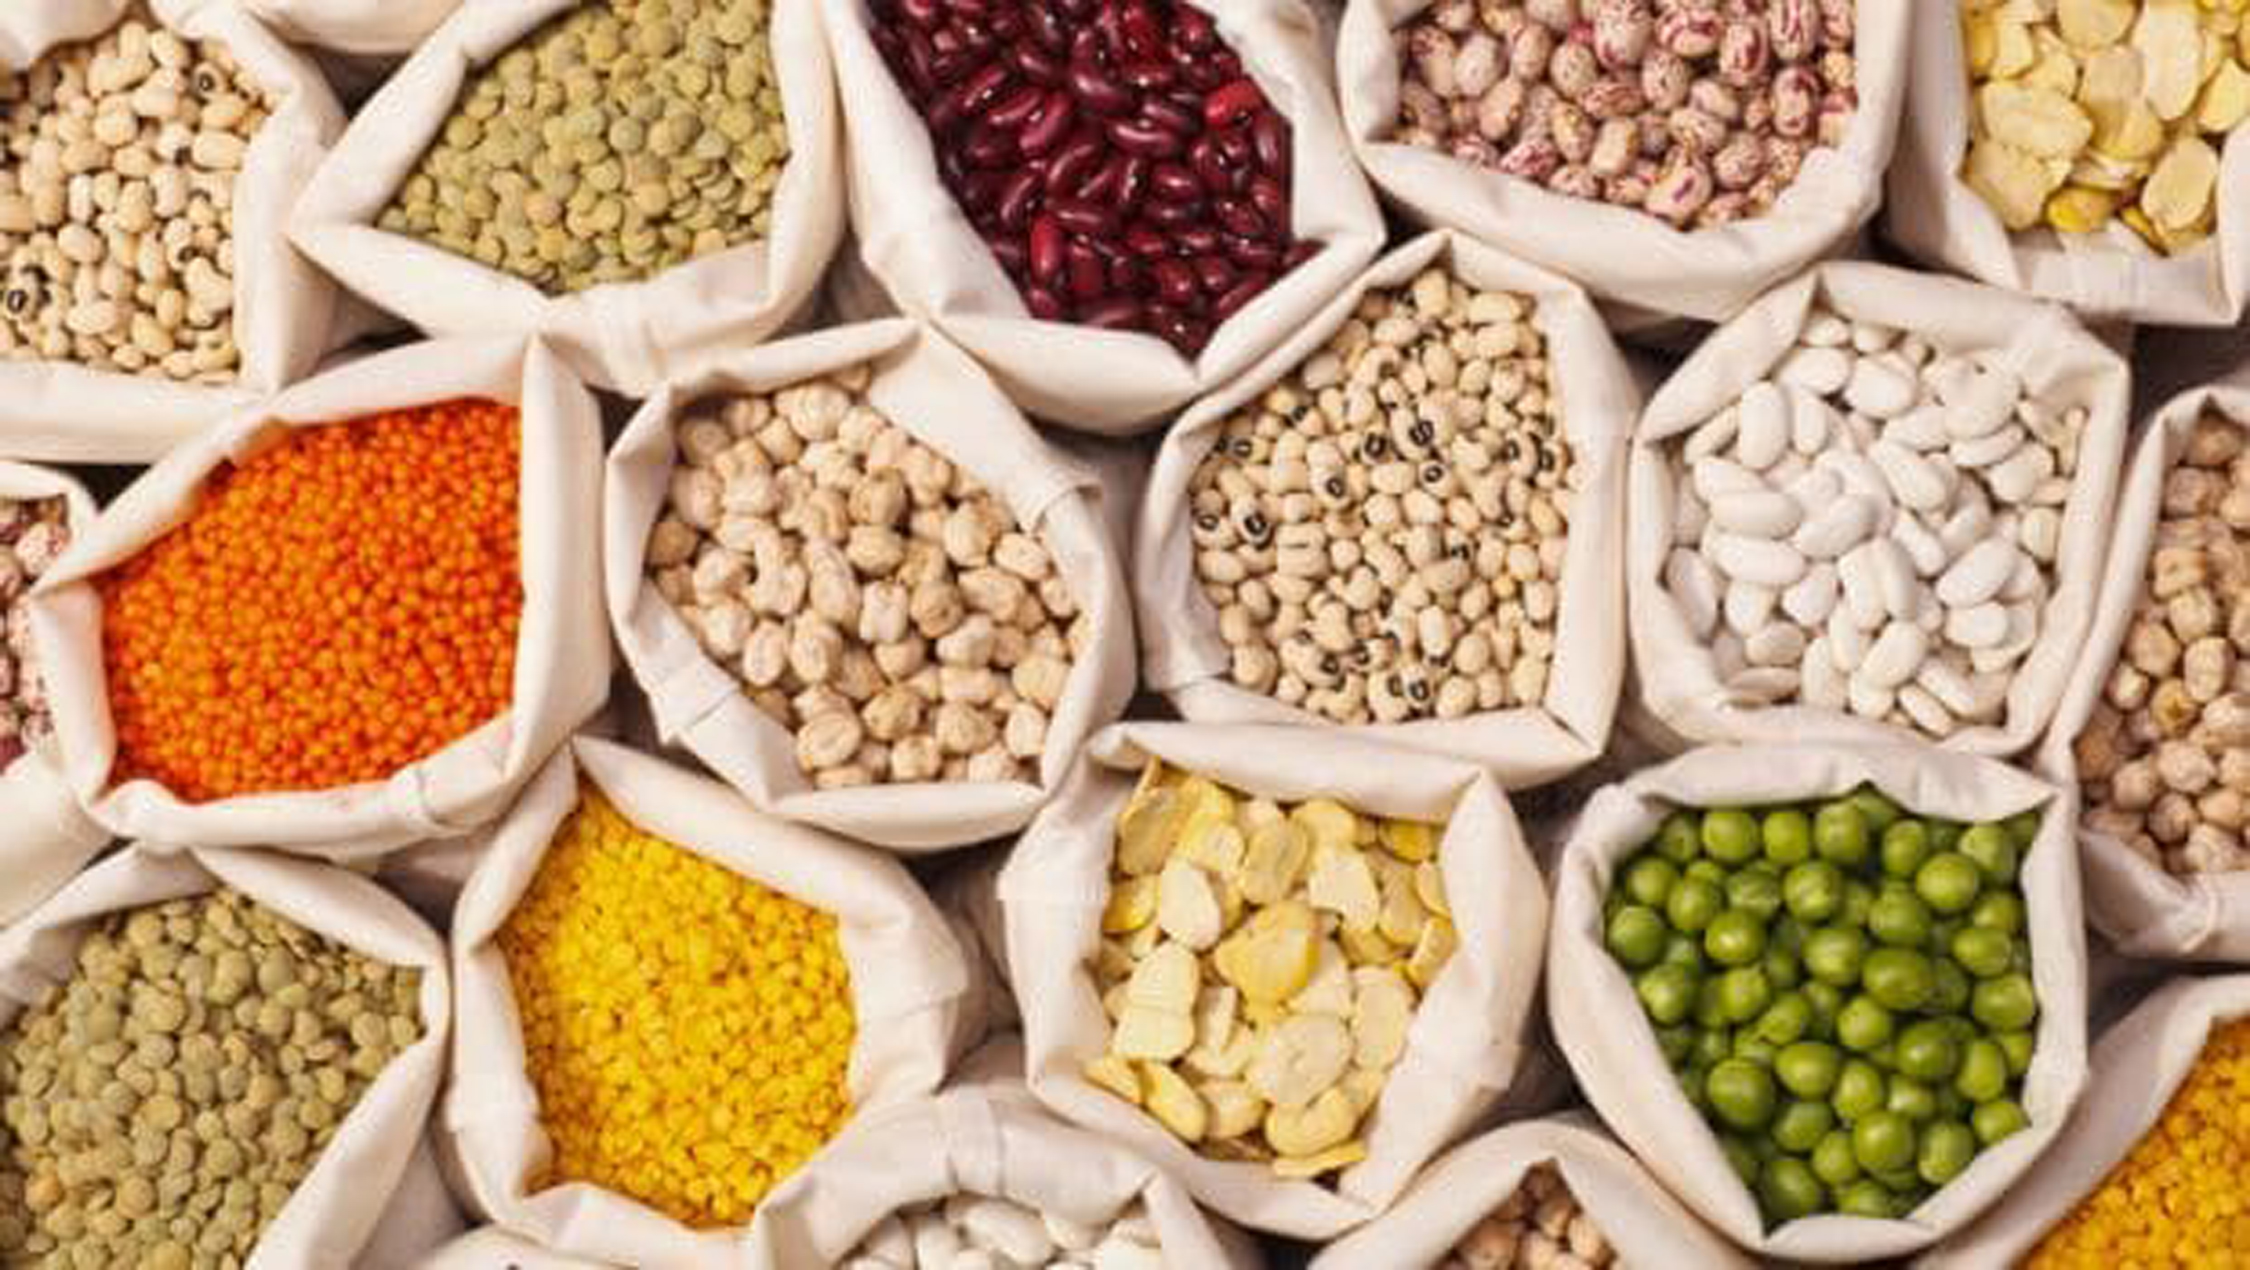 Proteins from pulses